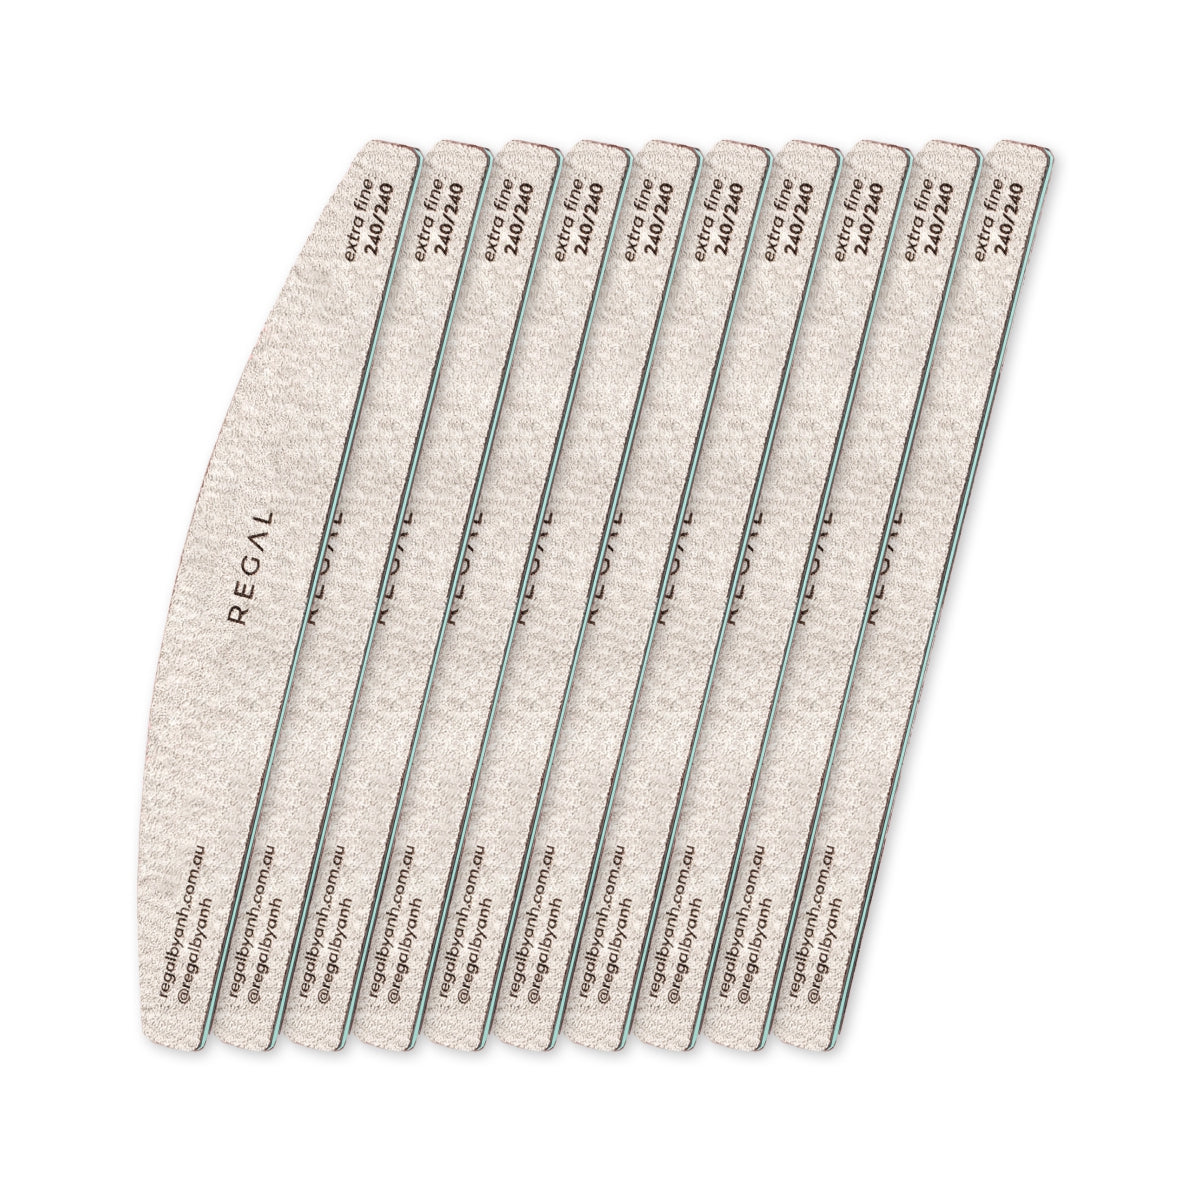 Regal by Anh Harbour Bridge Extra Fine 240/240 Nail File (10 Pack)